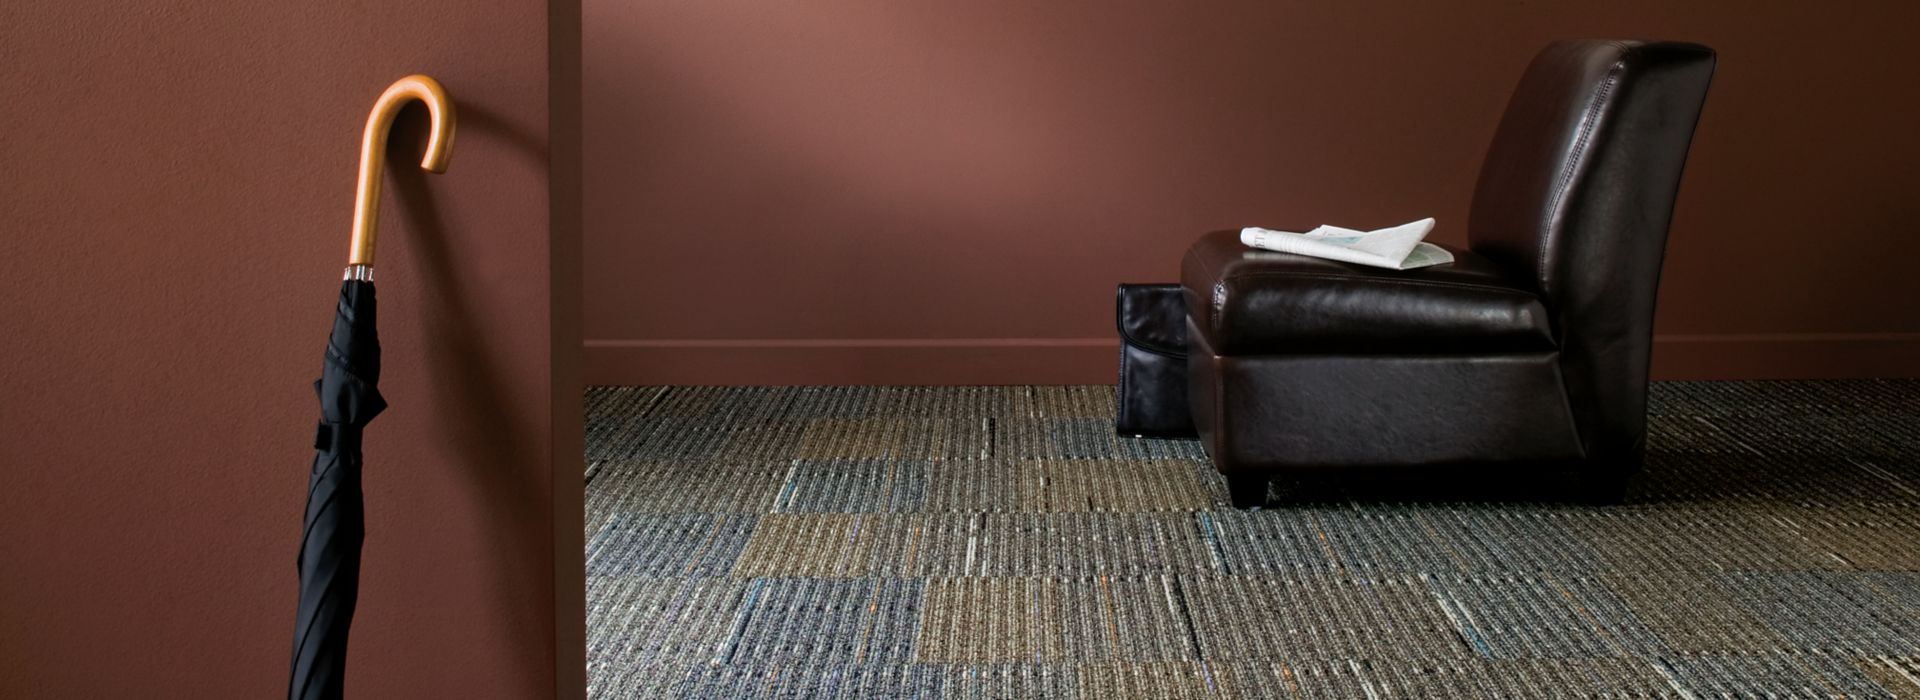 Interface Stroud II carpet tile with leather chair and umbrella